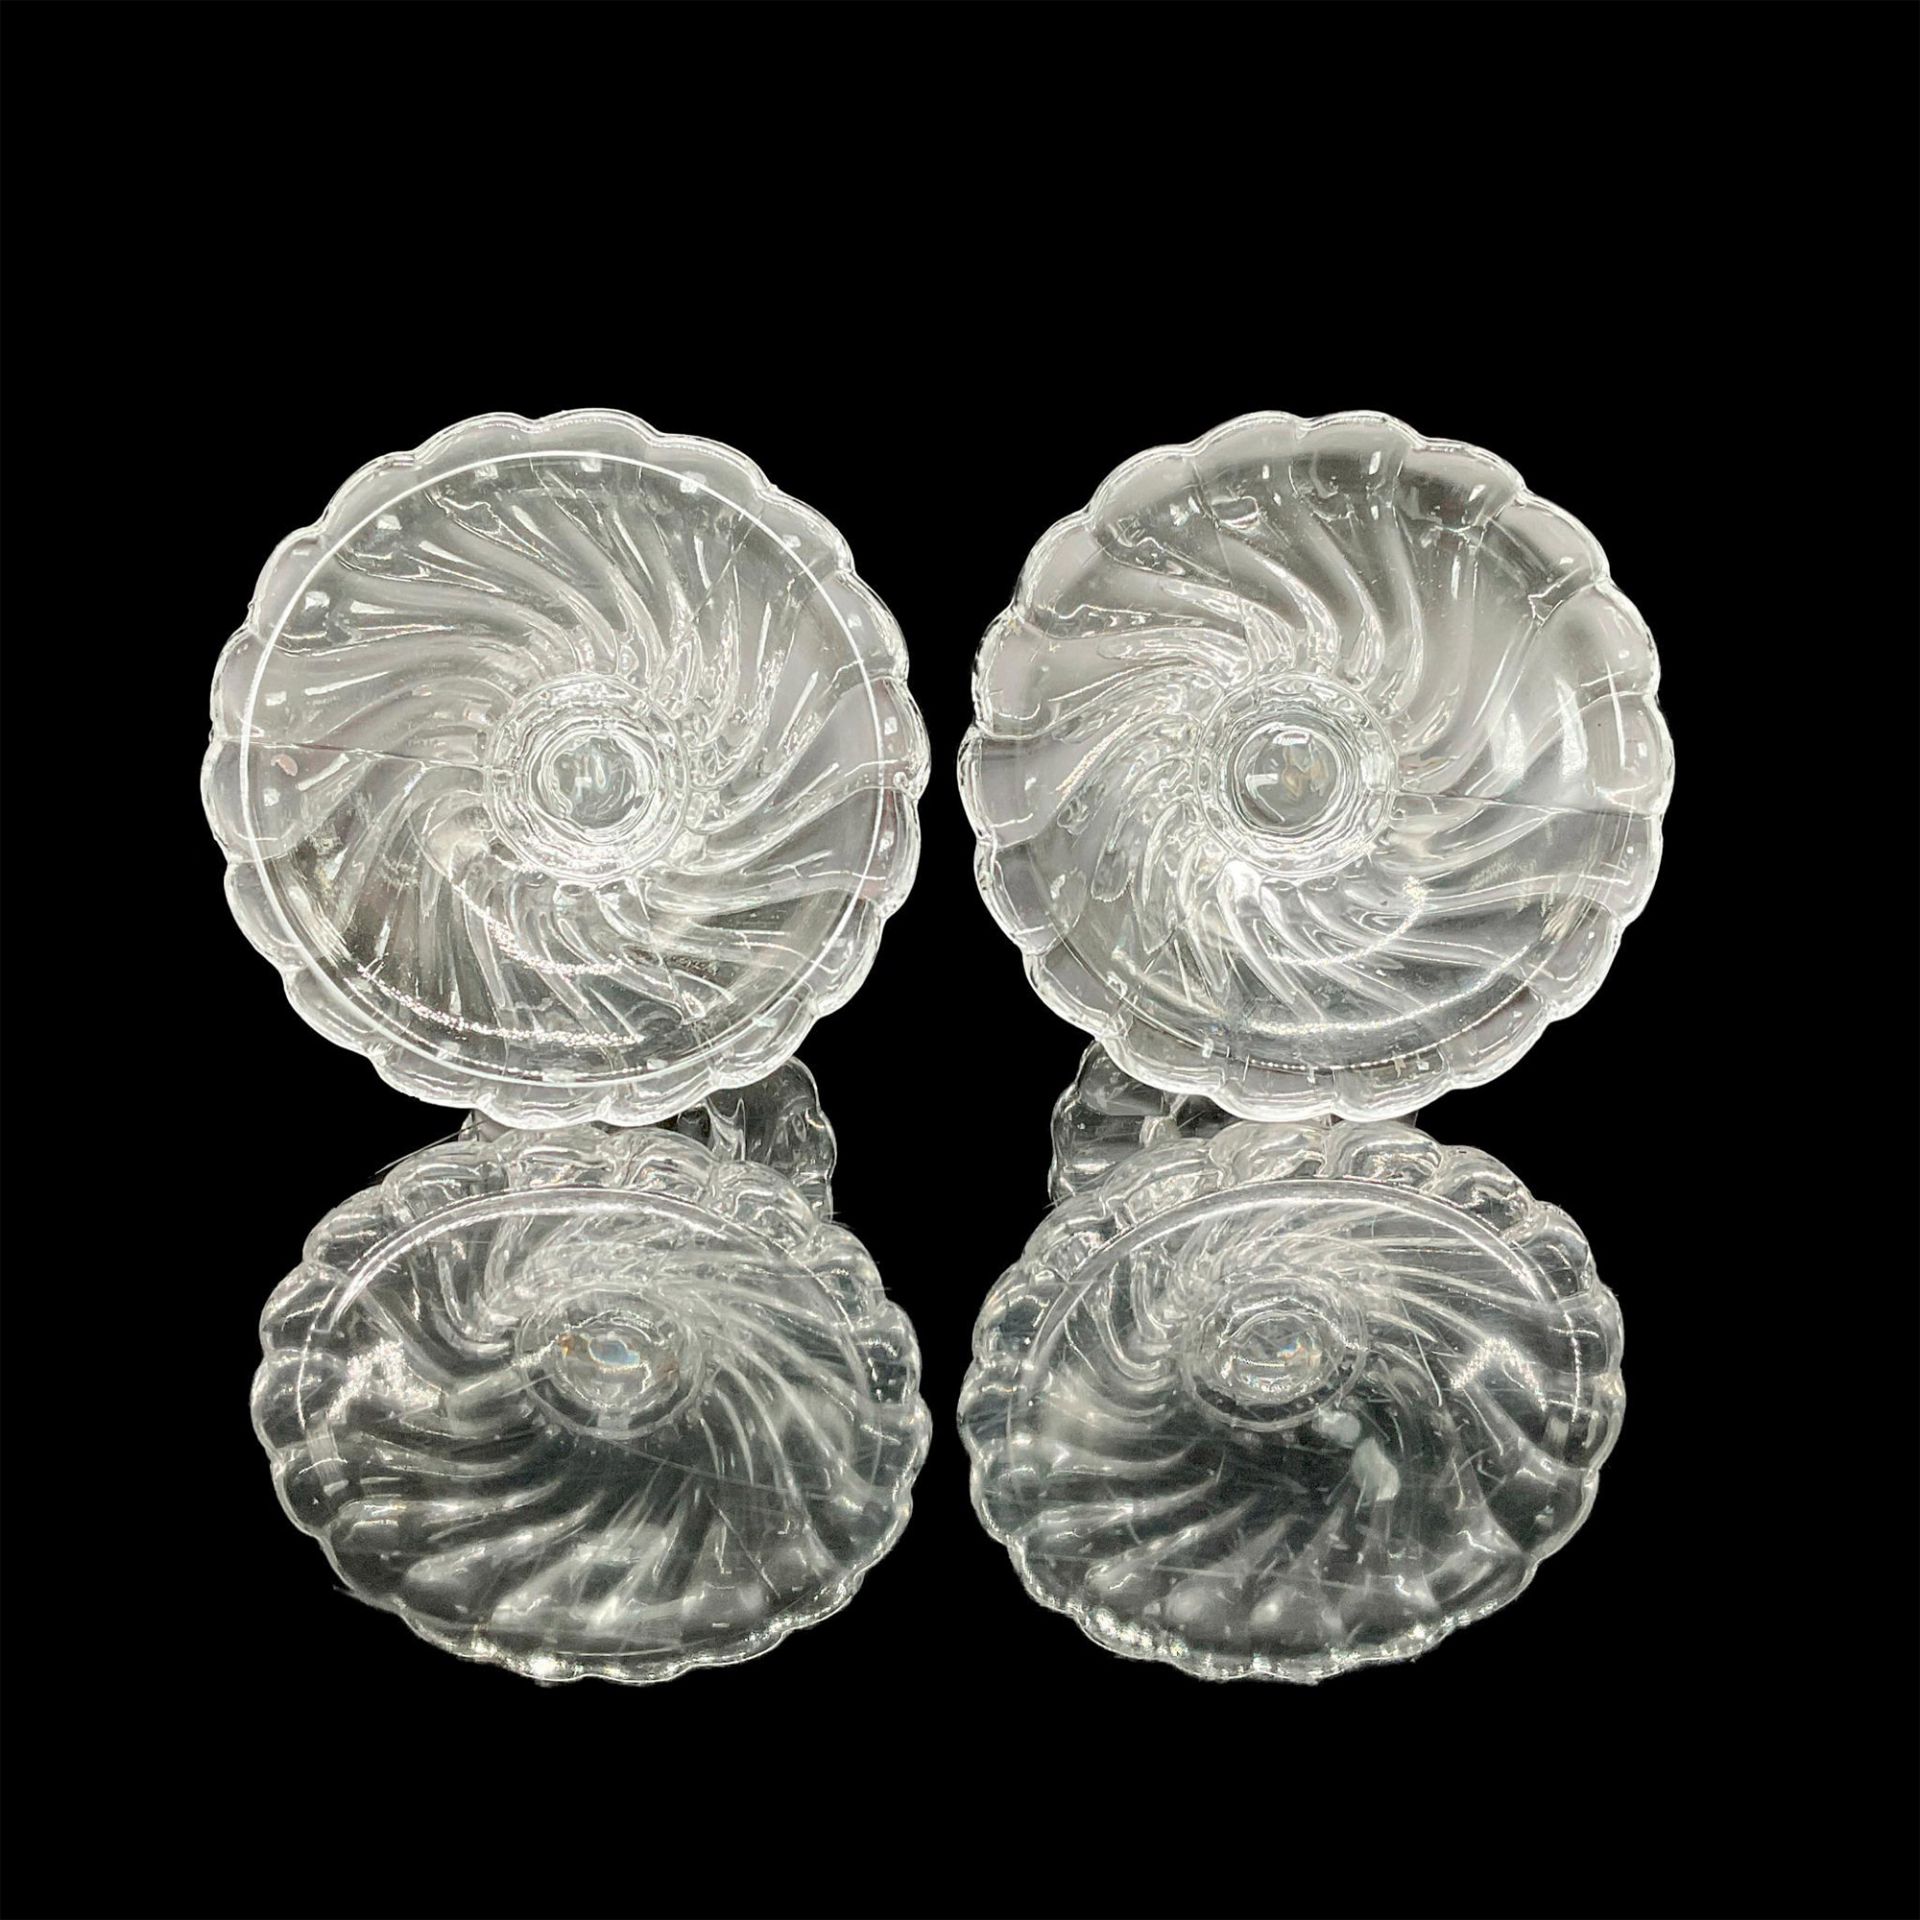 Pair of Fostoria Colony Glass Candle Holders - Image 3 of 3